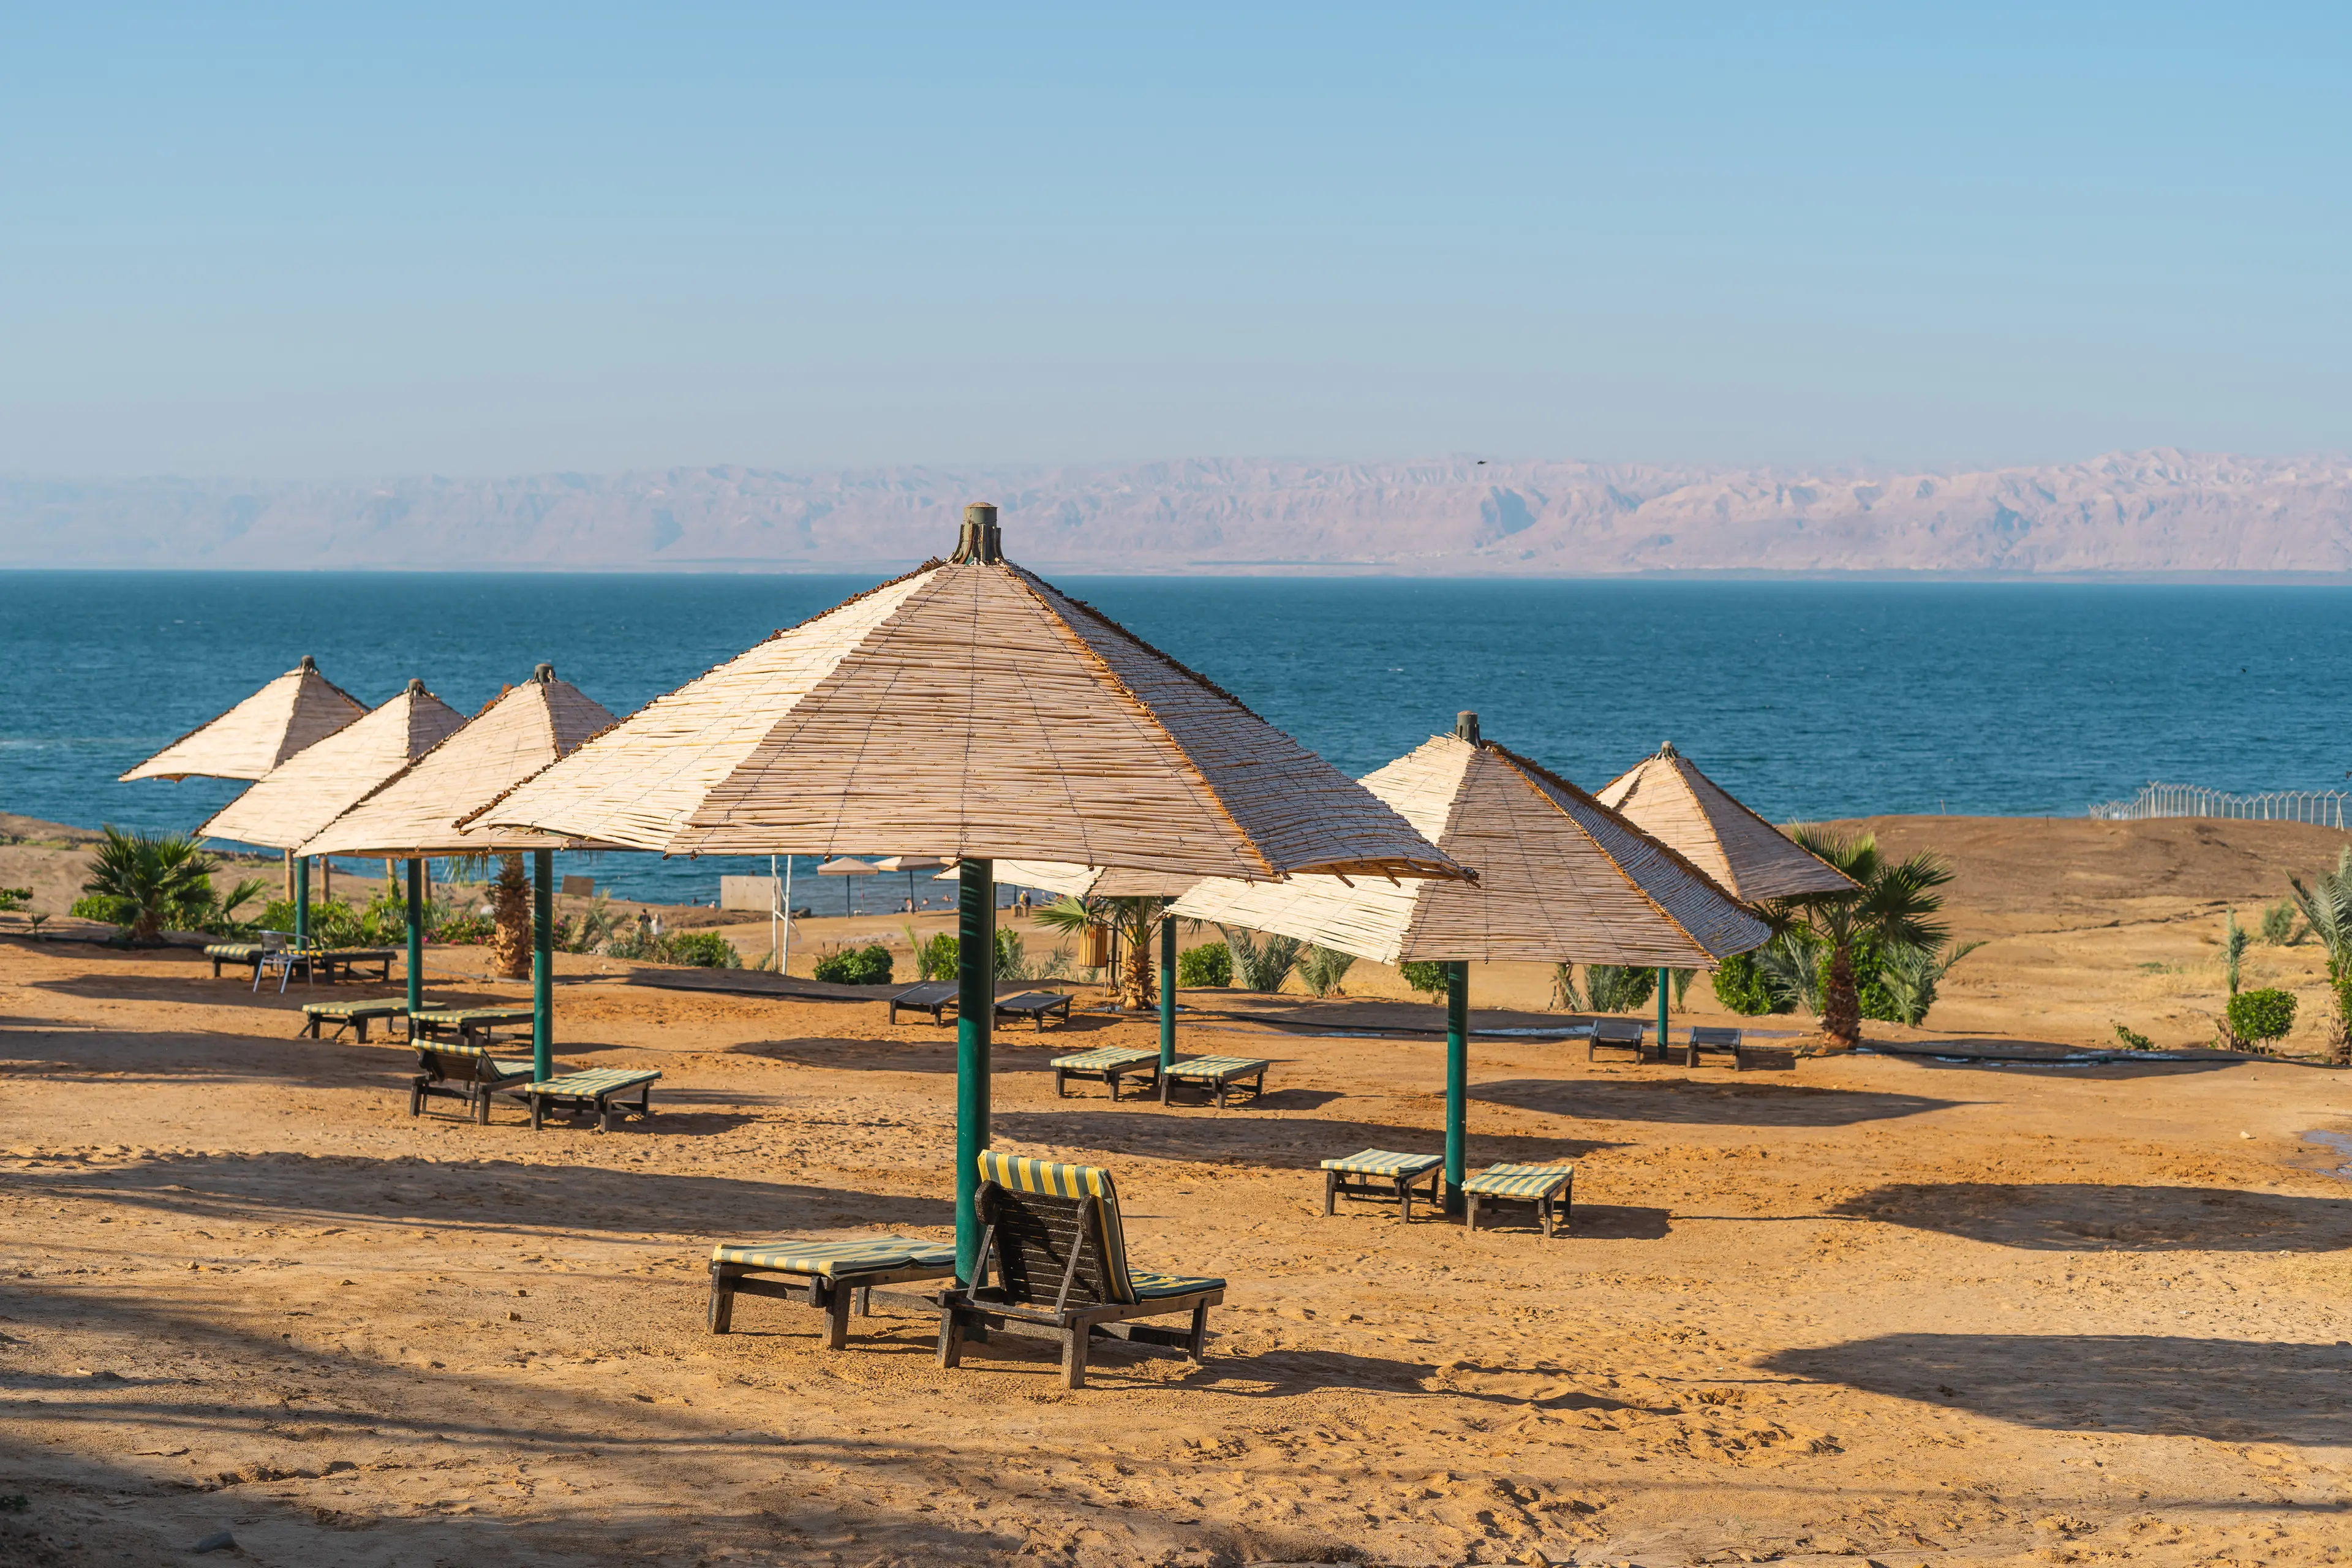 1-Day Exploration Guide to the Dead Sea, Jordan